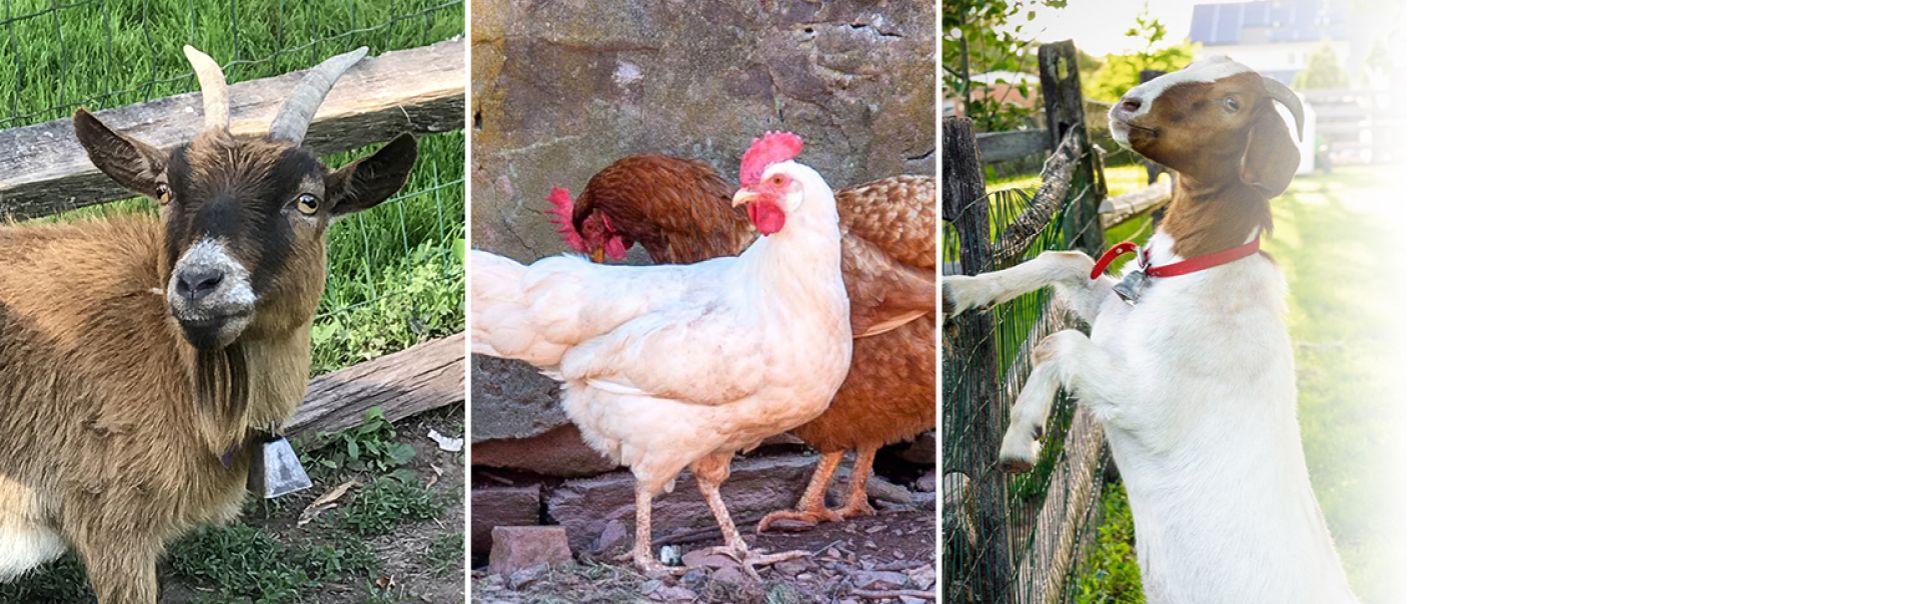 goats and chickens on a farm